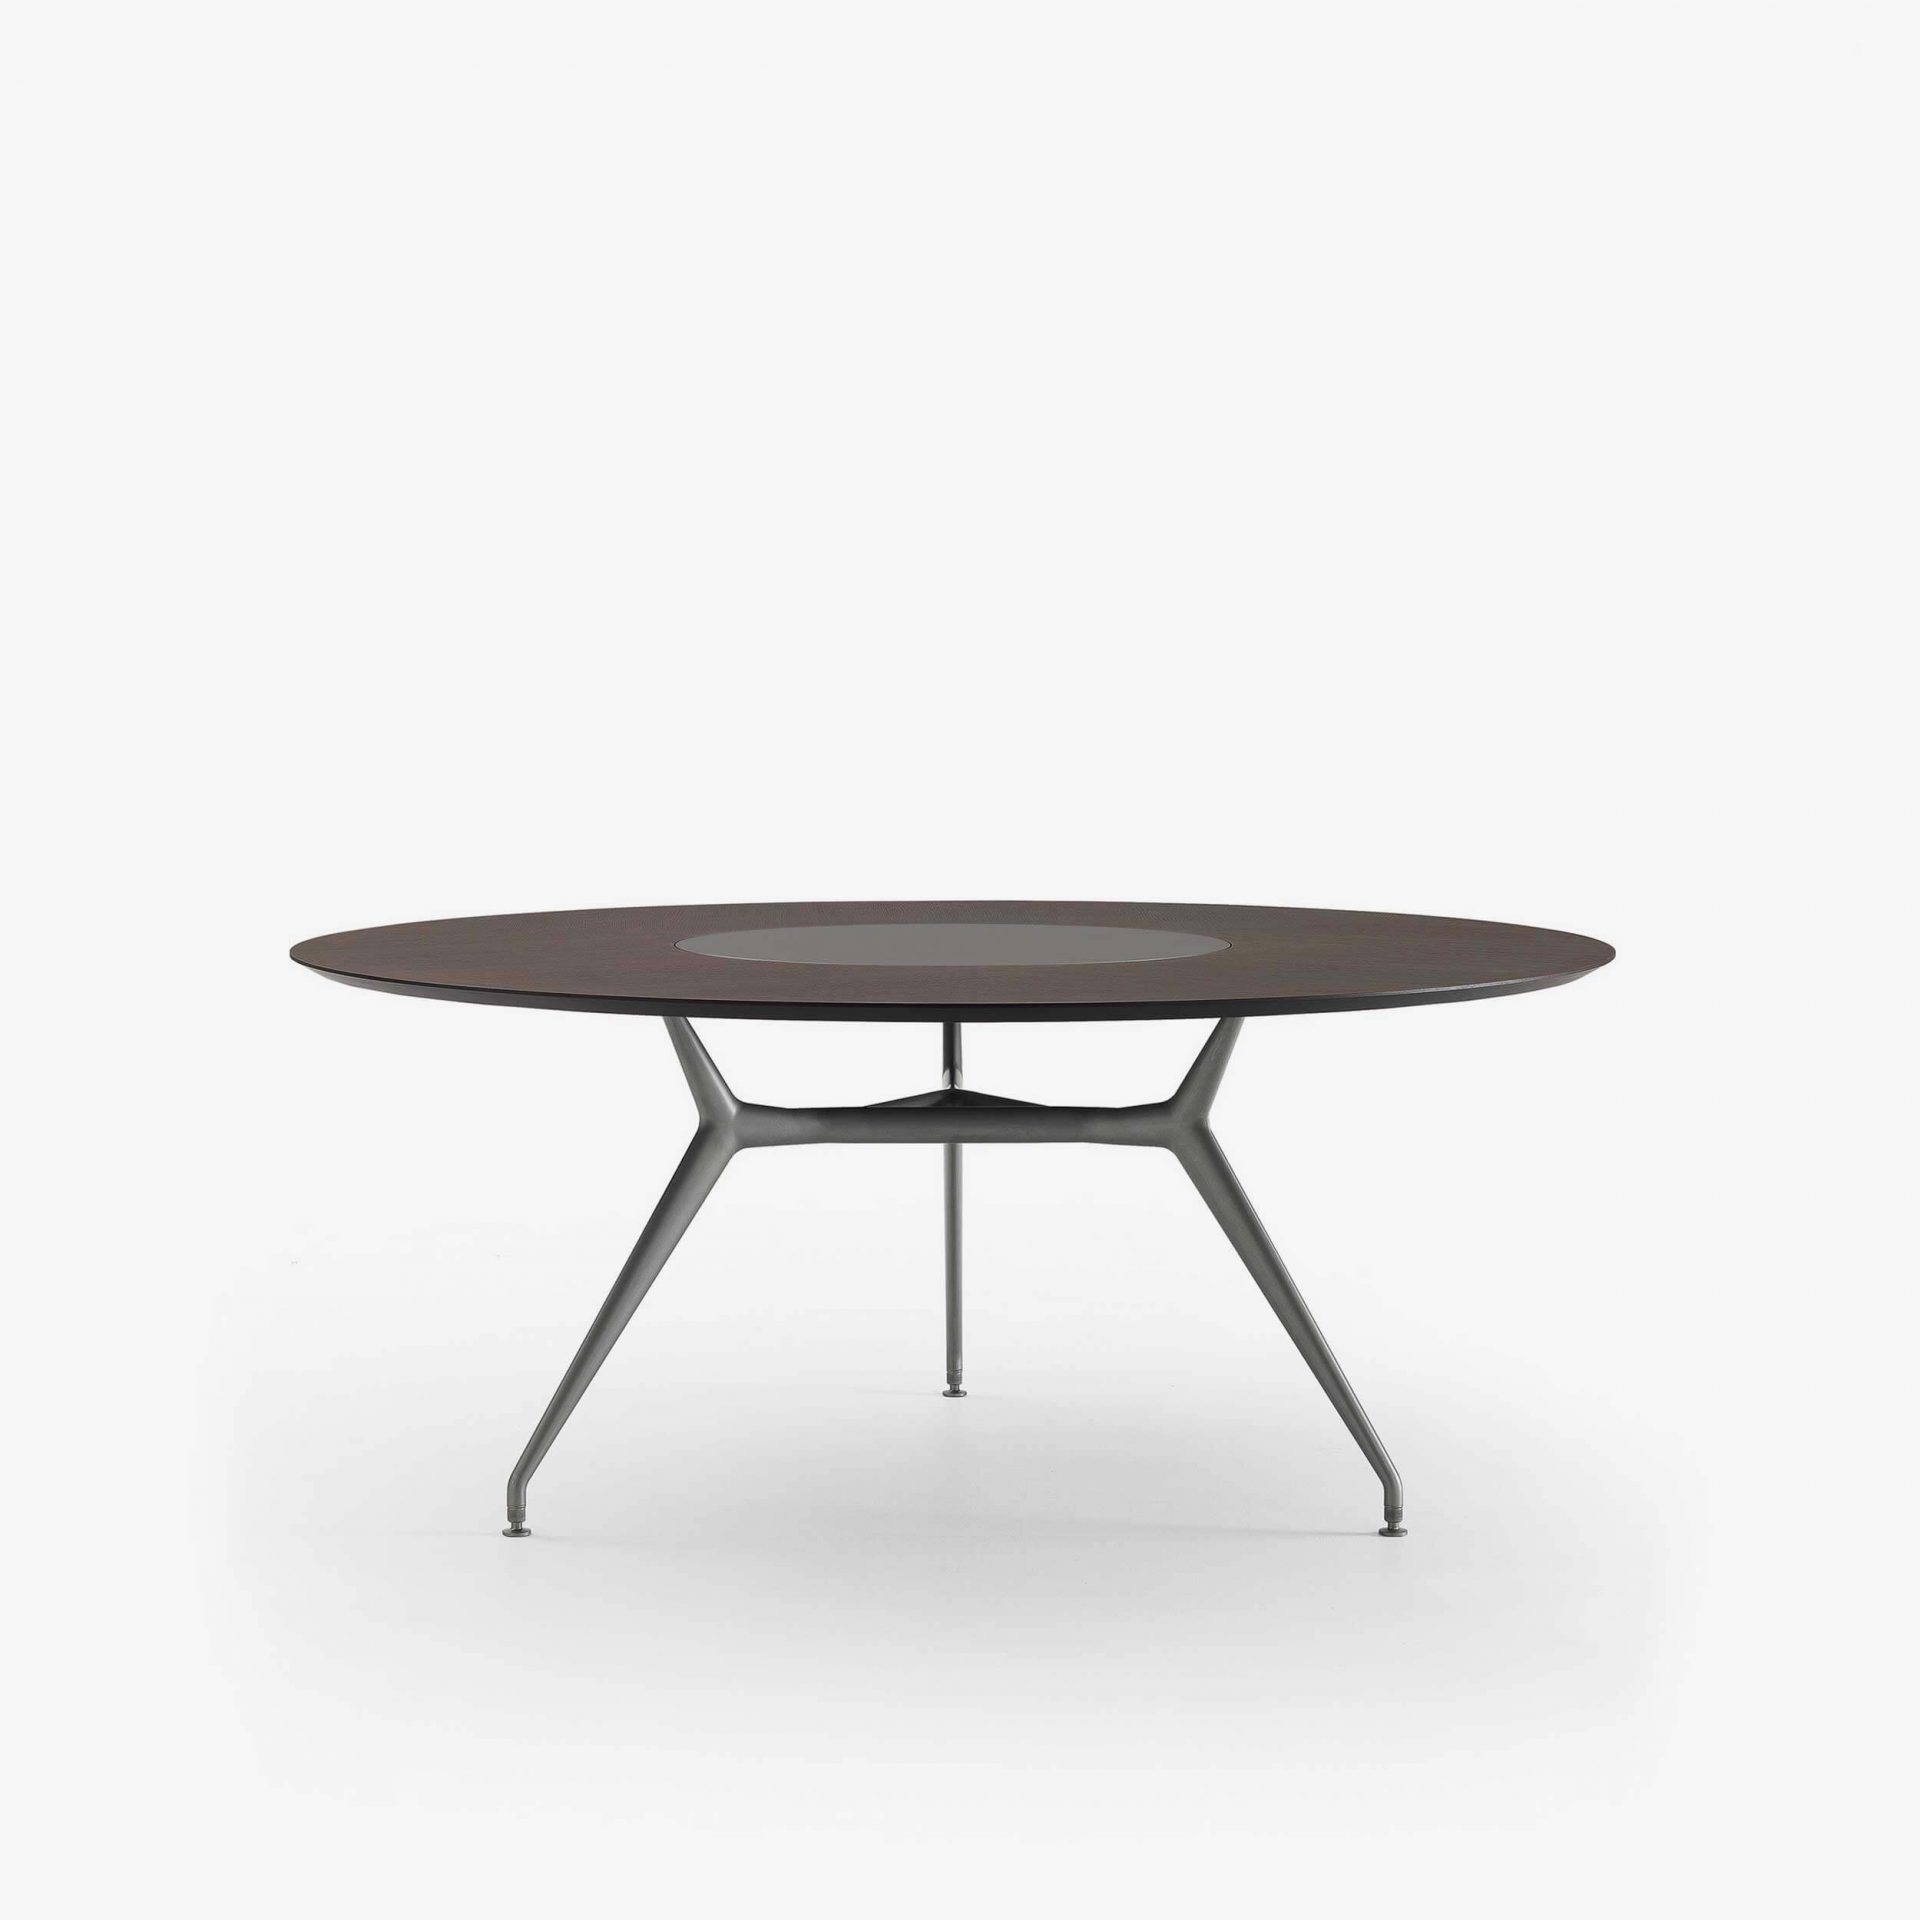 Manta table with lazy susan top